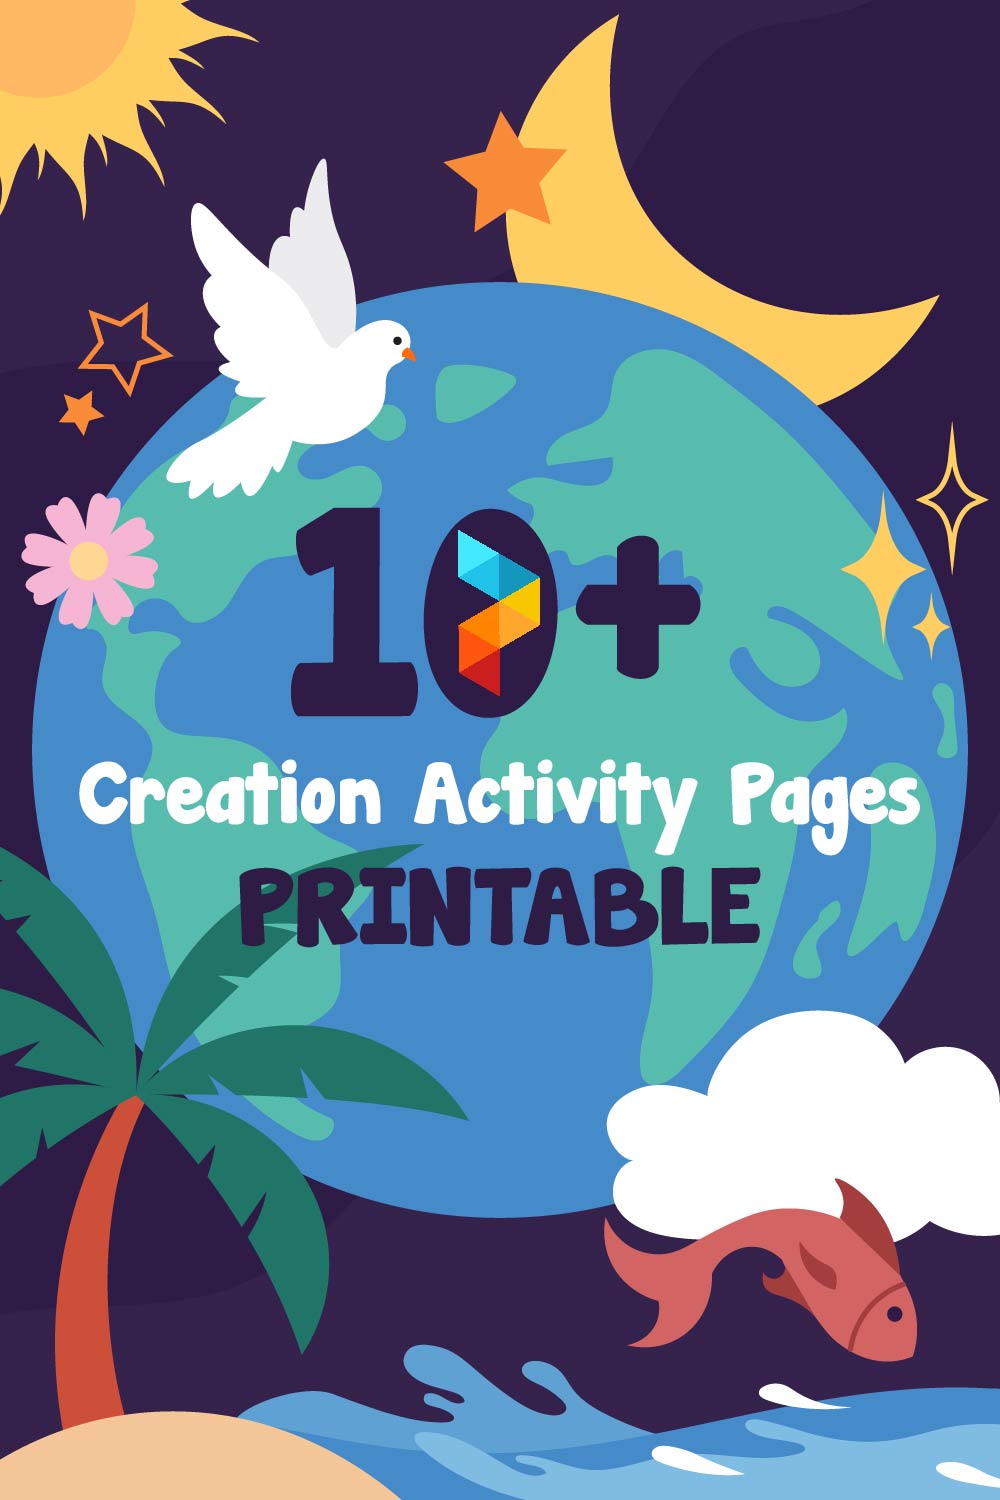 Printable Creation Activity Pages